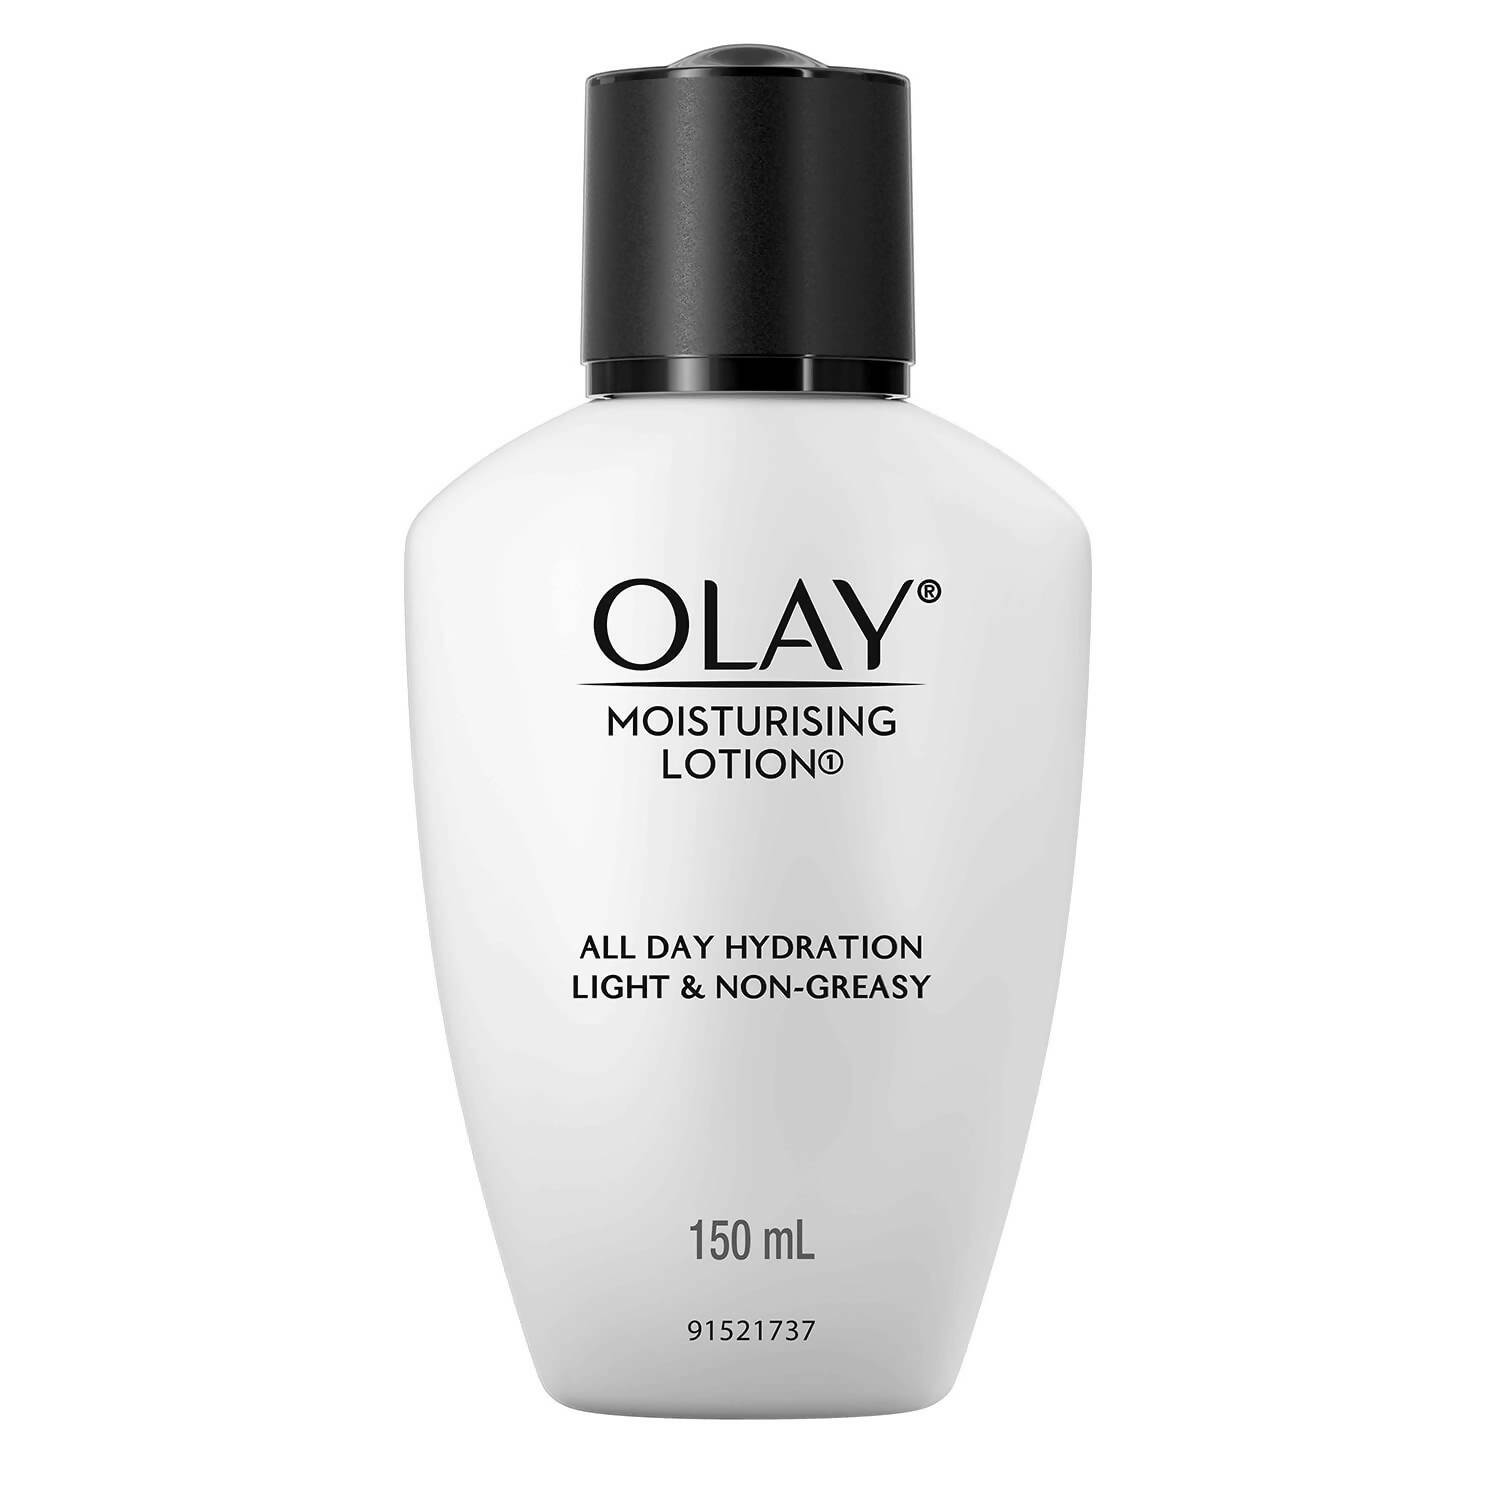 Olay Moisturising Lotion with Coconut, Caster Seed Oil, Glycerin - BUDNEN